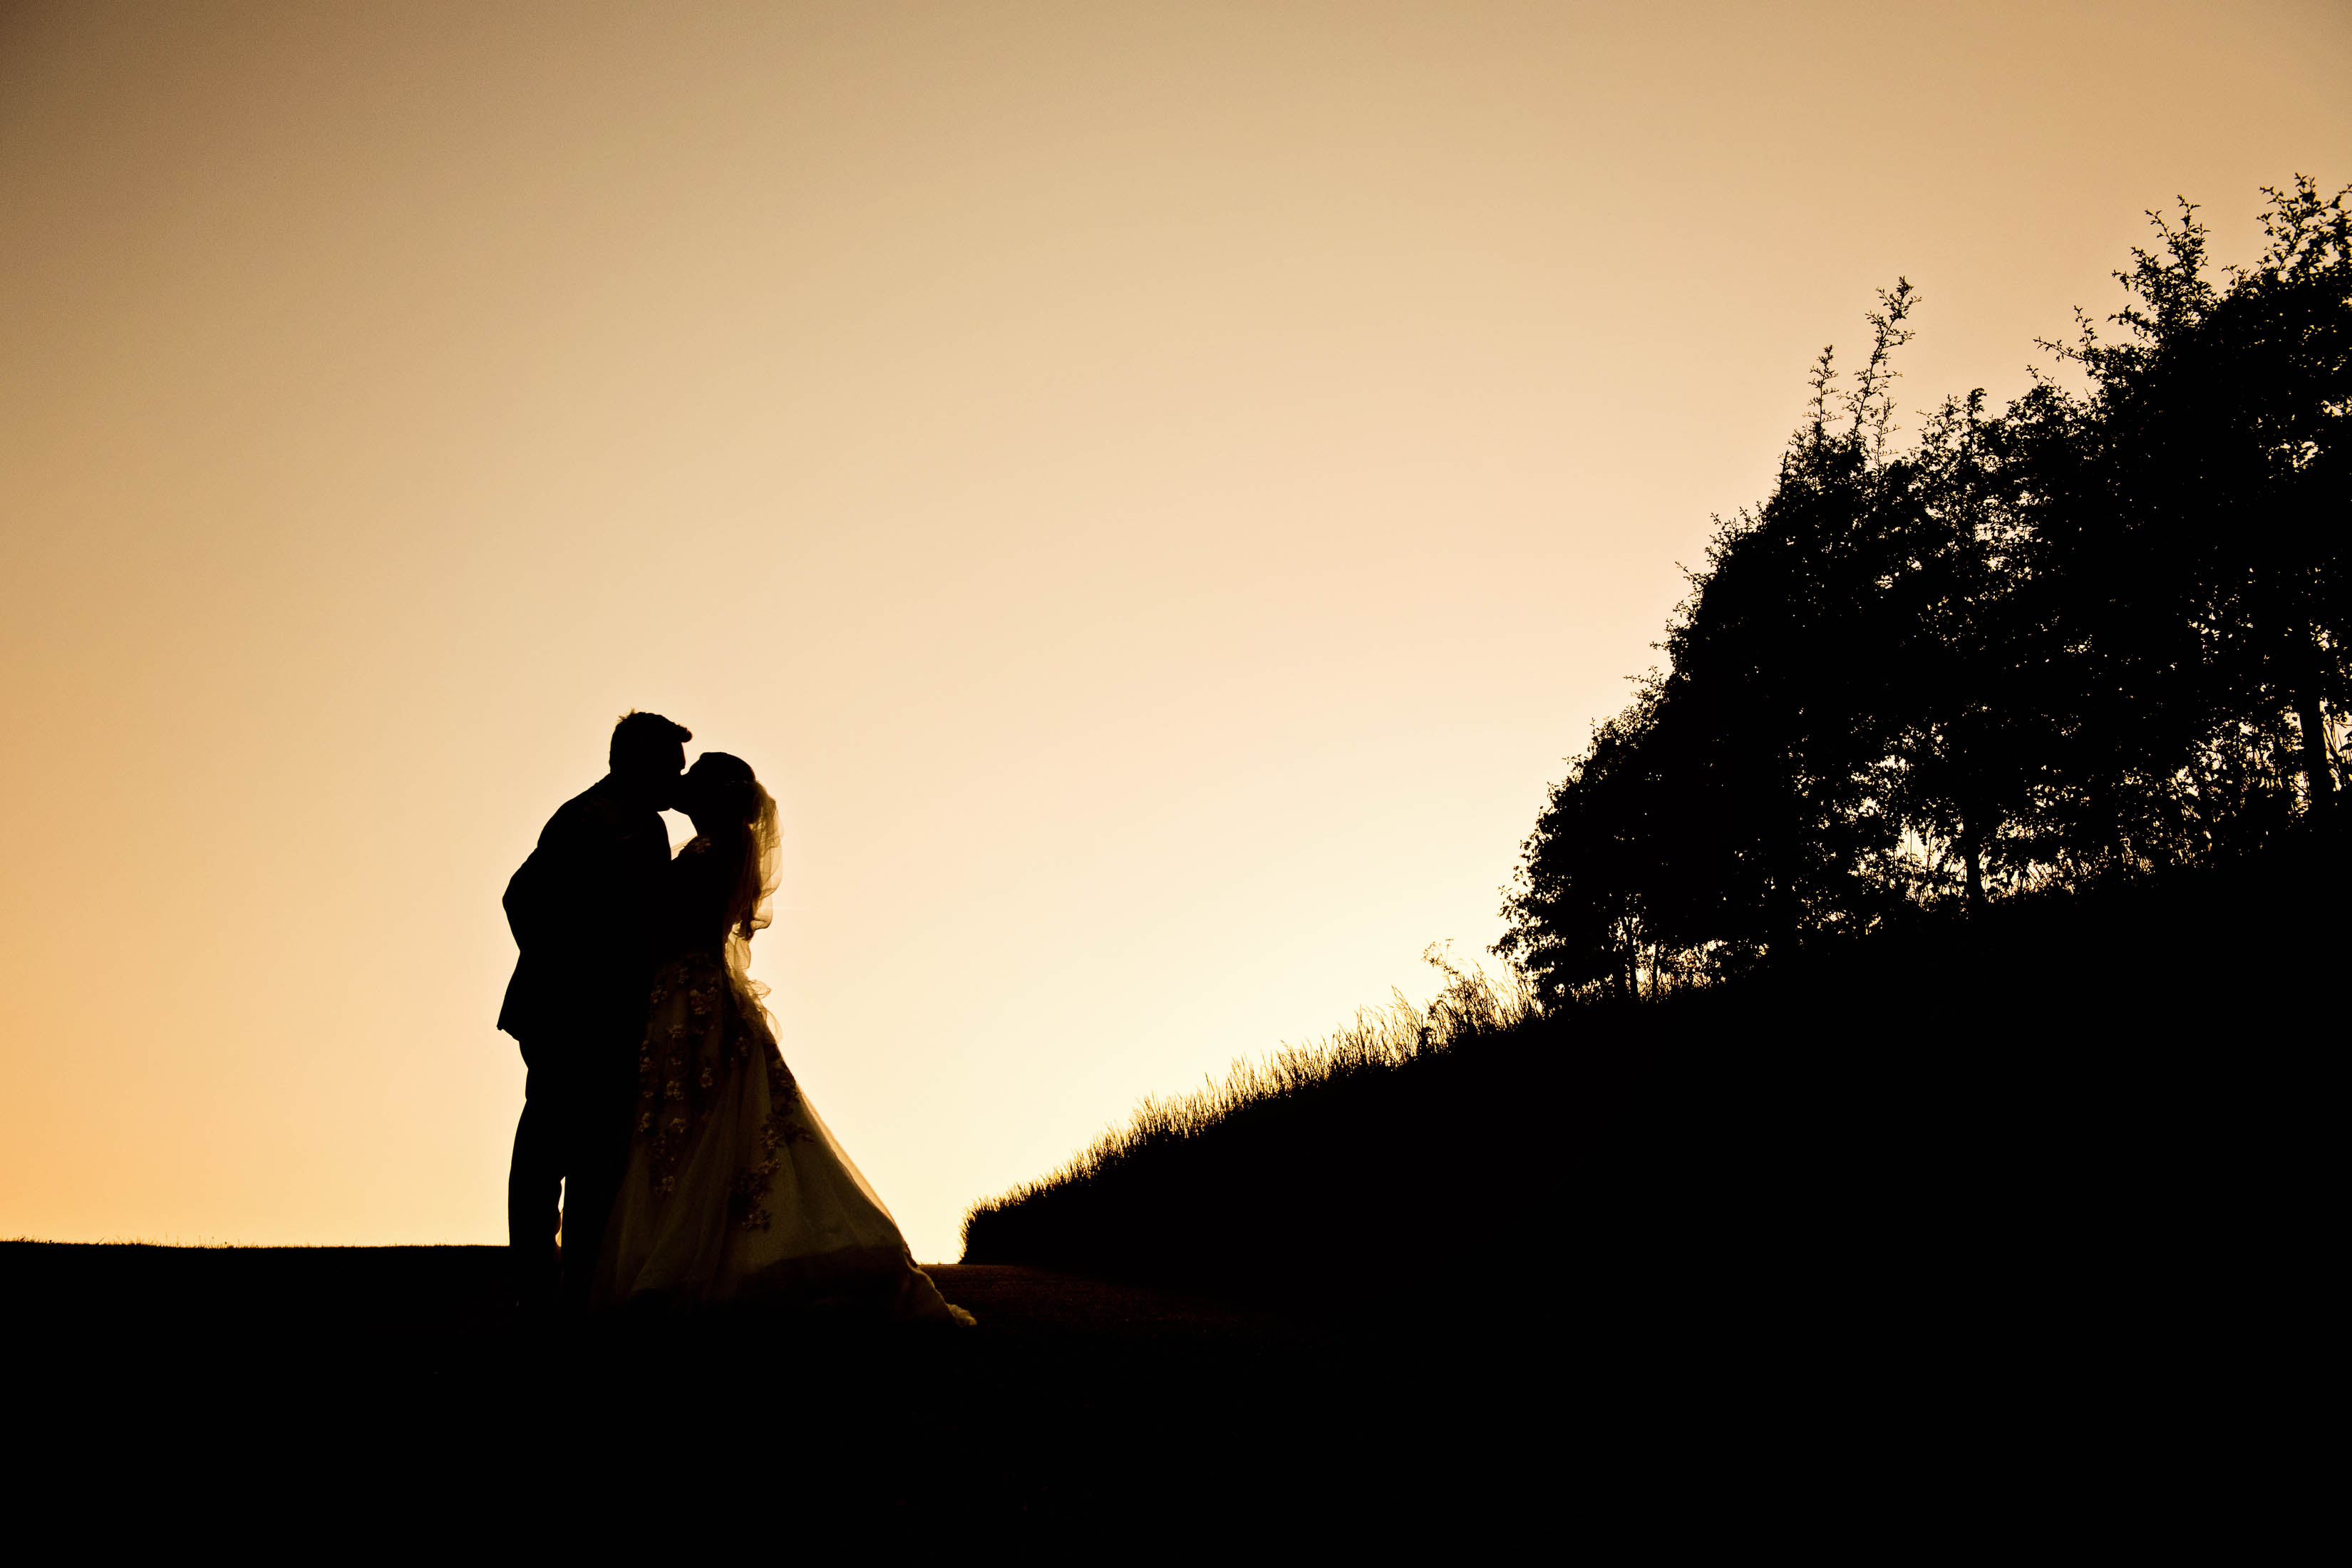 Bride and groom kiss, silhouetted from the sunset behind them. Taken at The Kingscote Barn